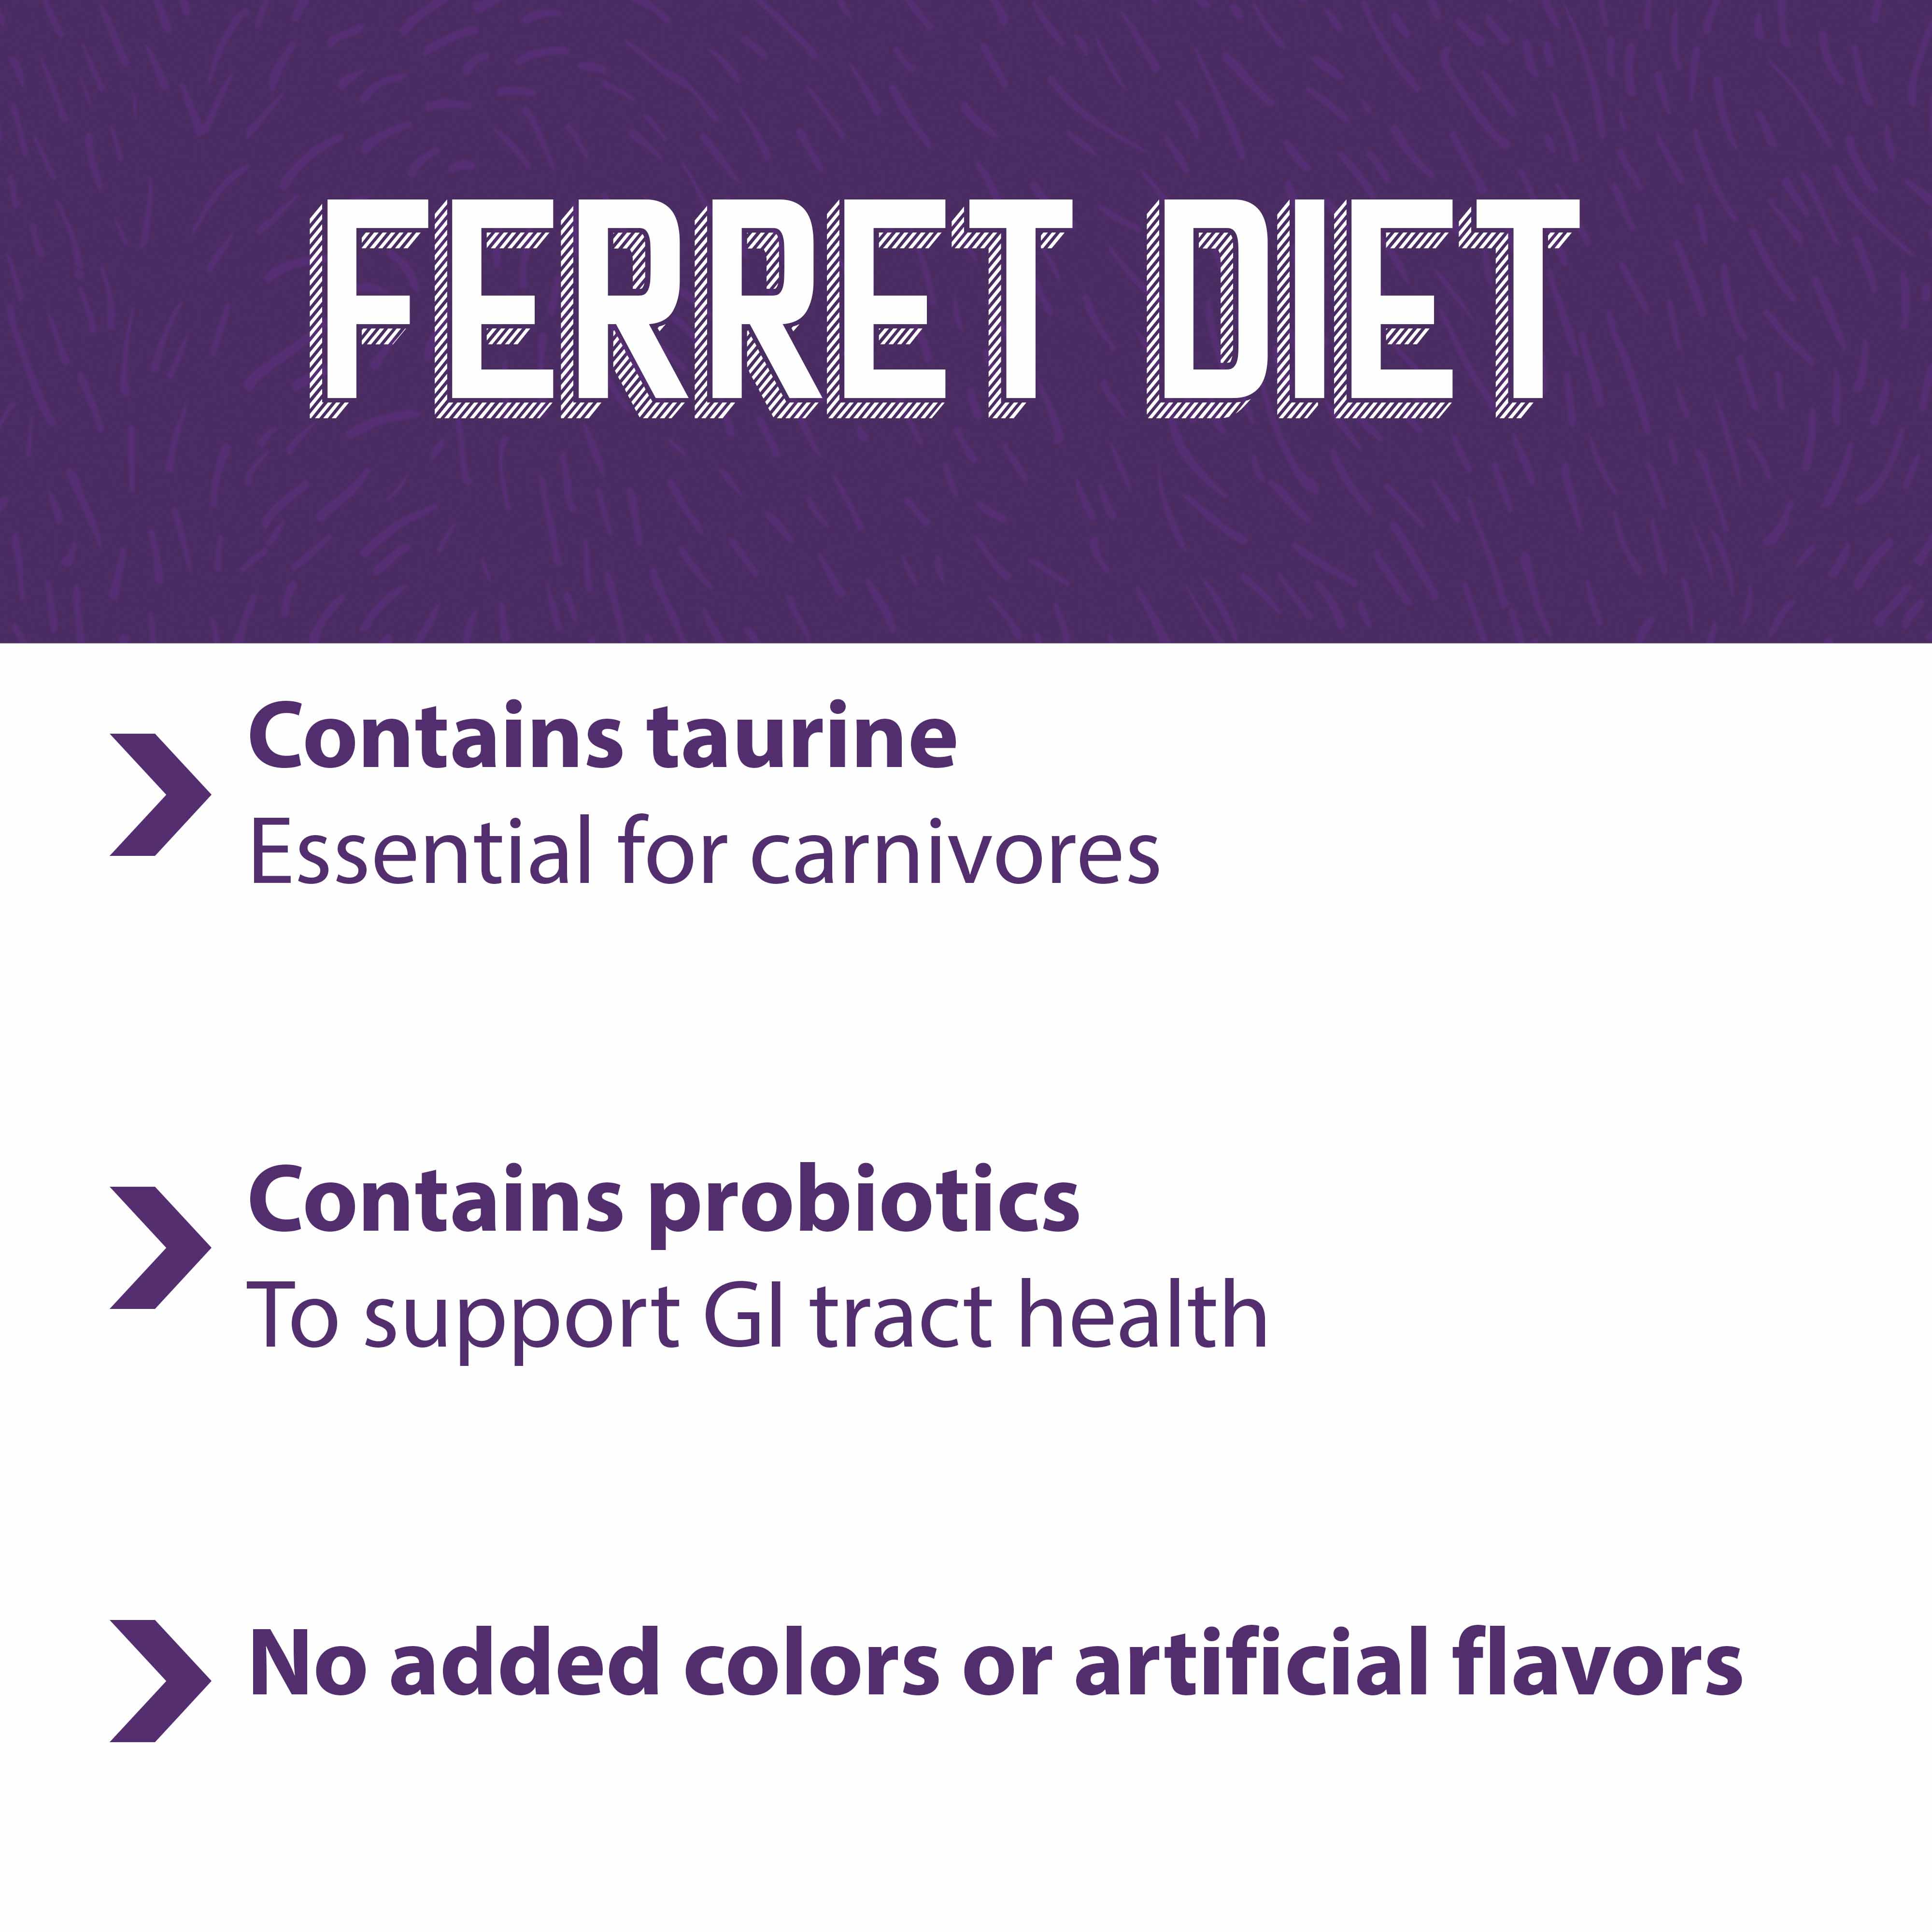 Ferret Diet contains Taurine essential for carnivores 